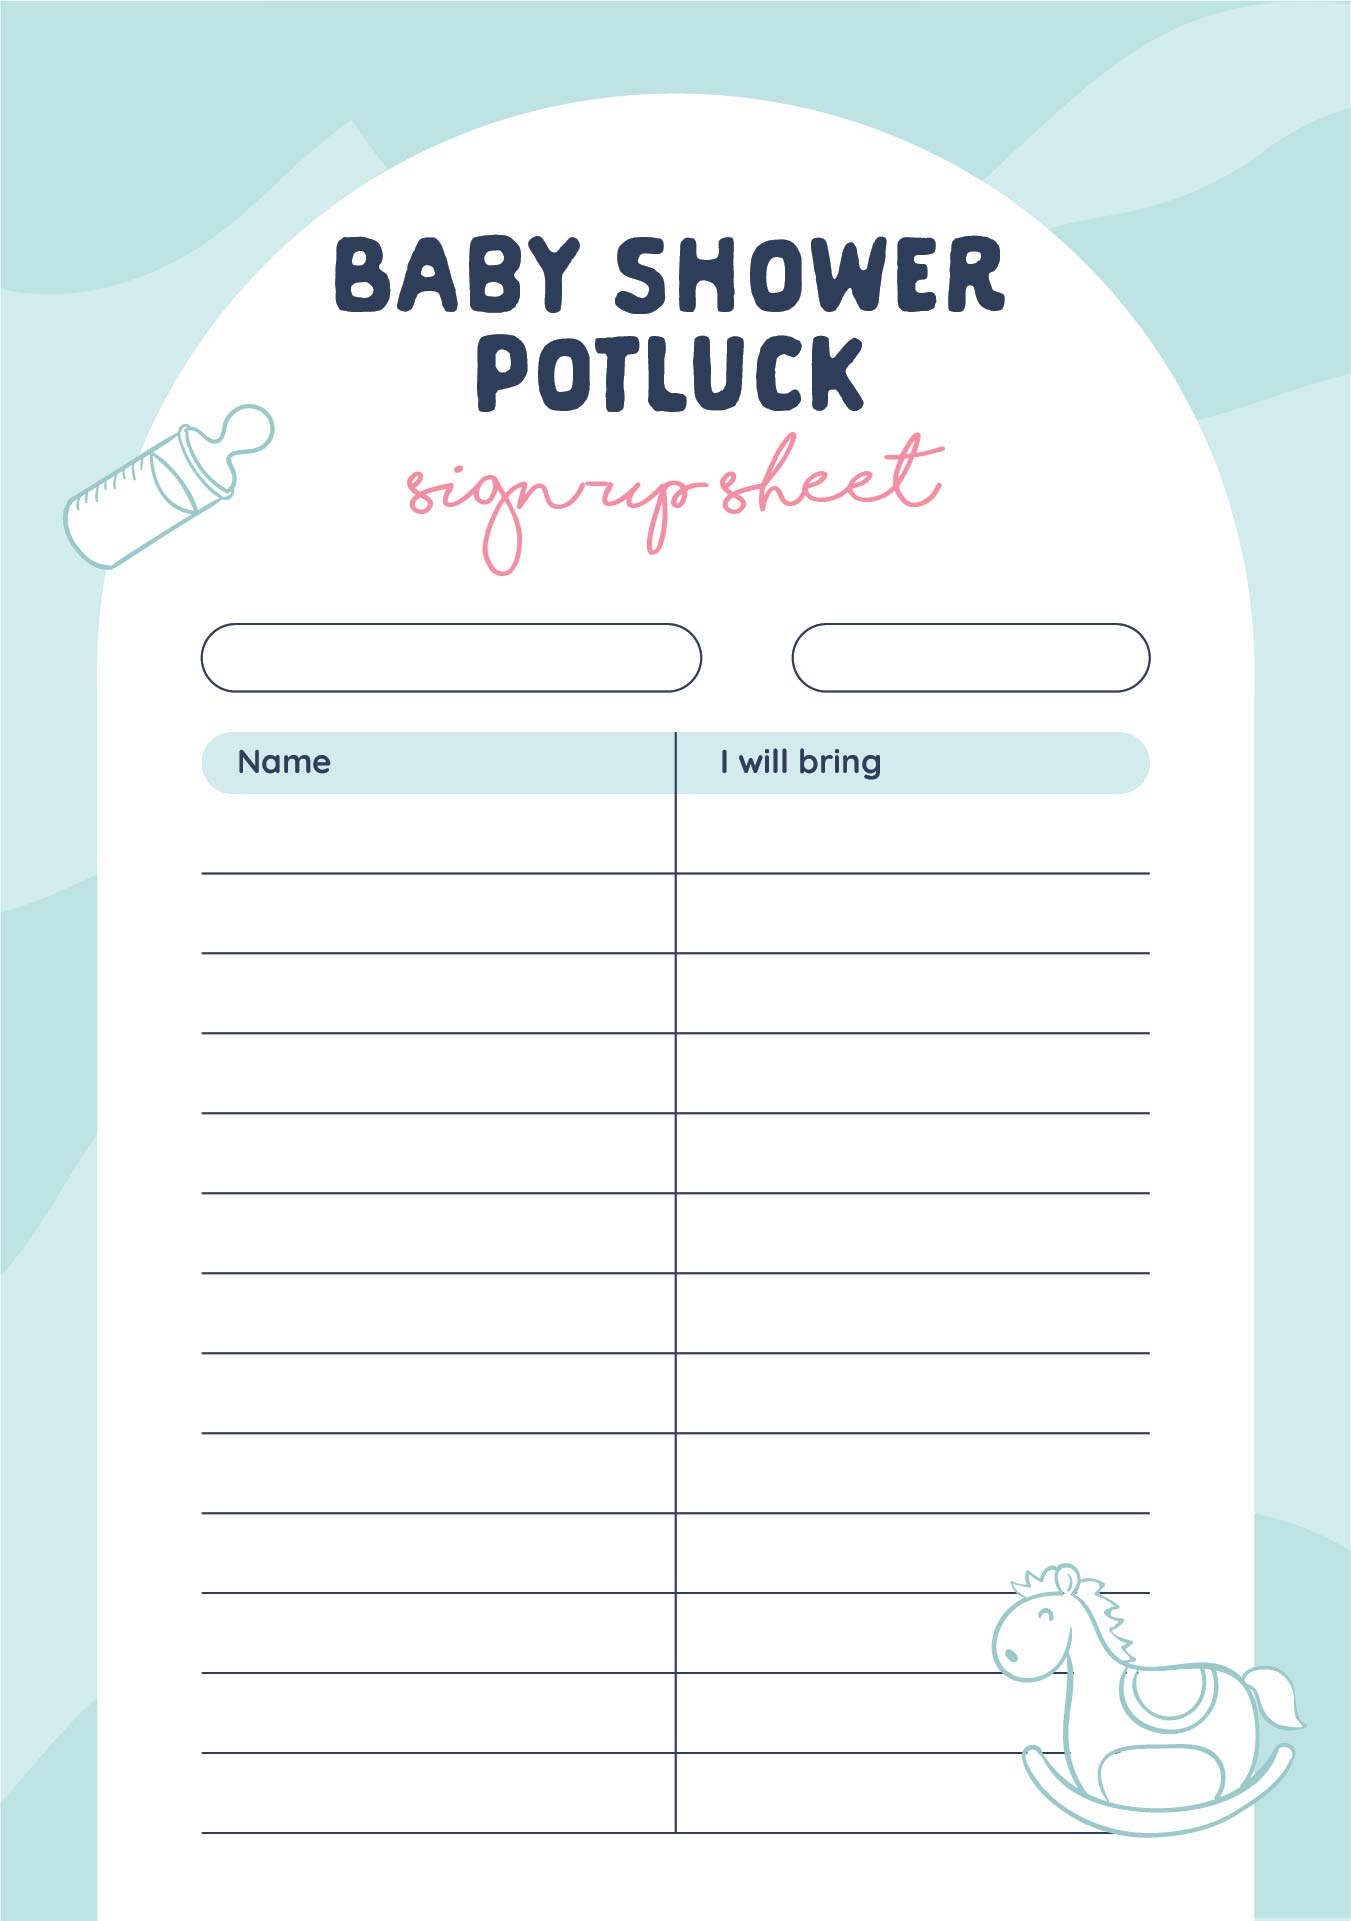 Baby Shower Potluck Sign Up Sheet Printable Template